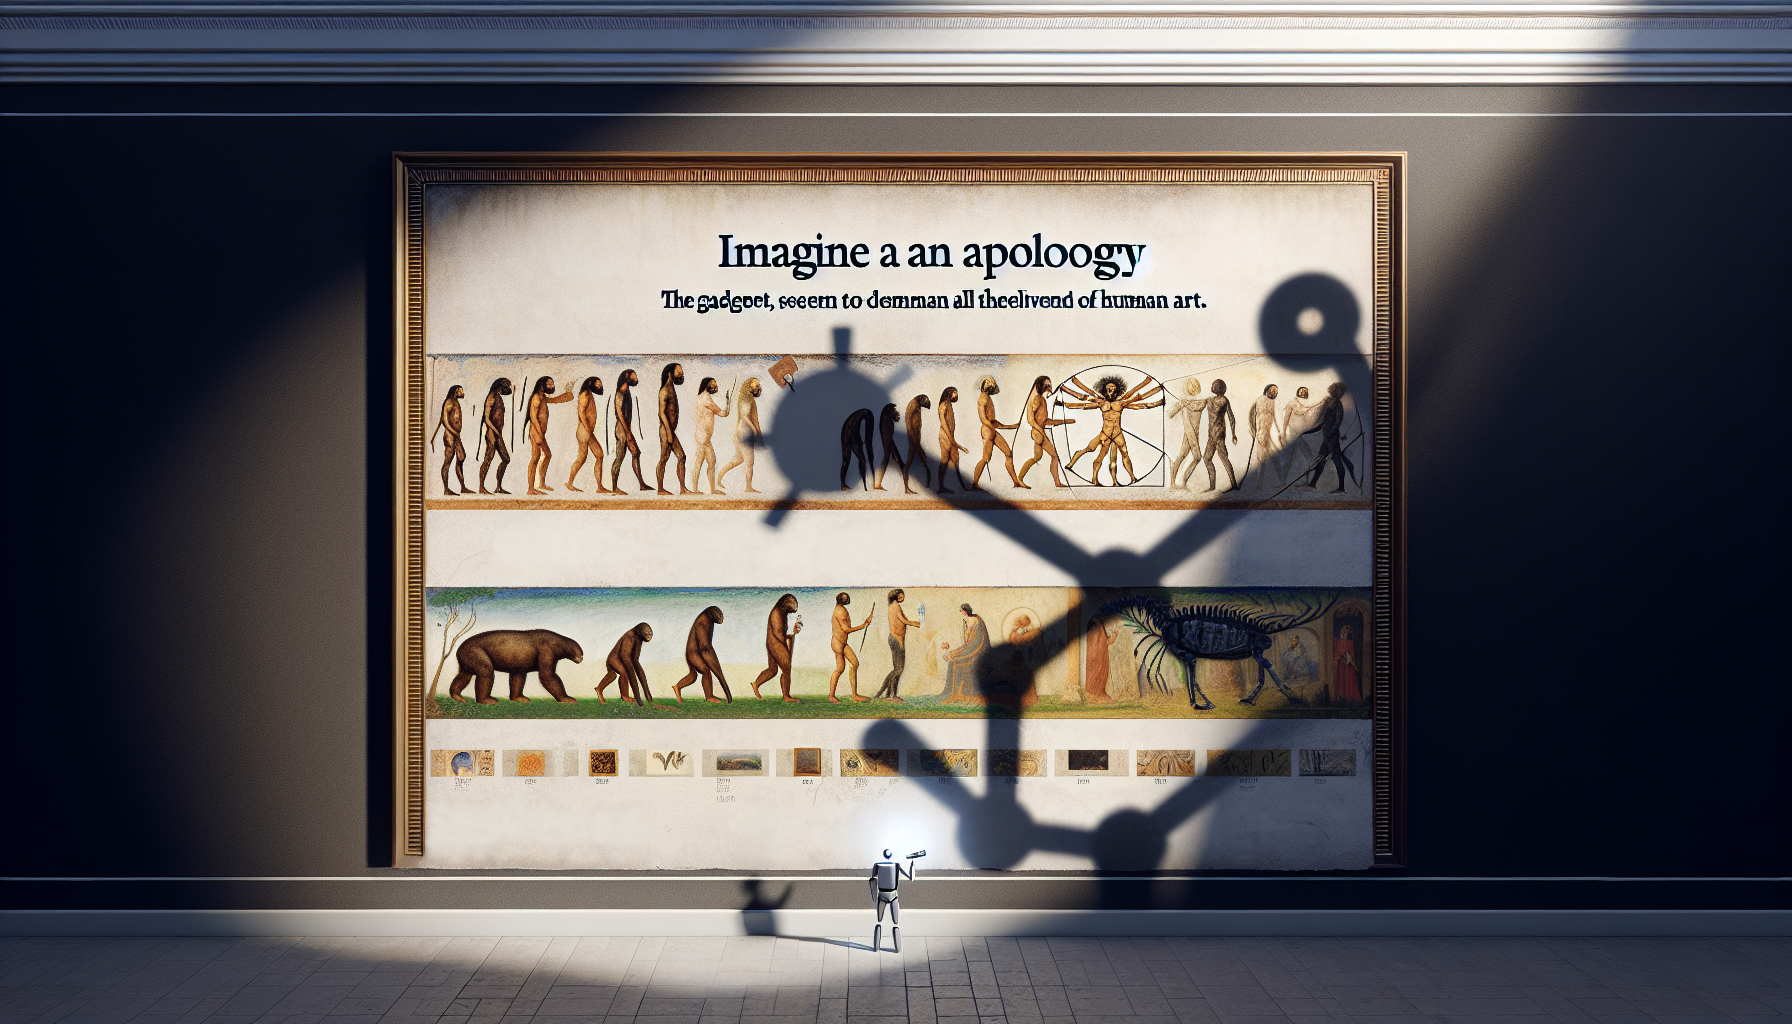 Apple apologizes for a contentious advertisement that disparages the whole scope of human art accomplishments.